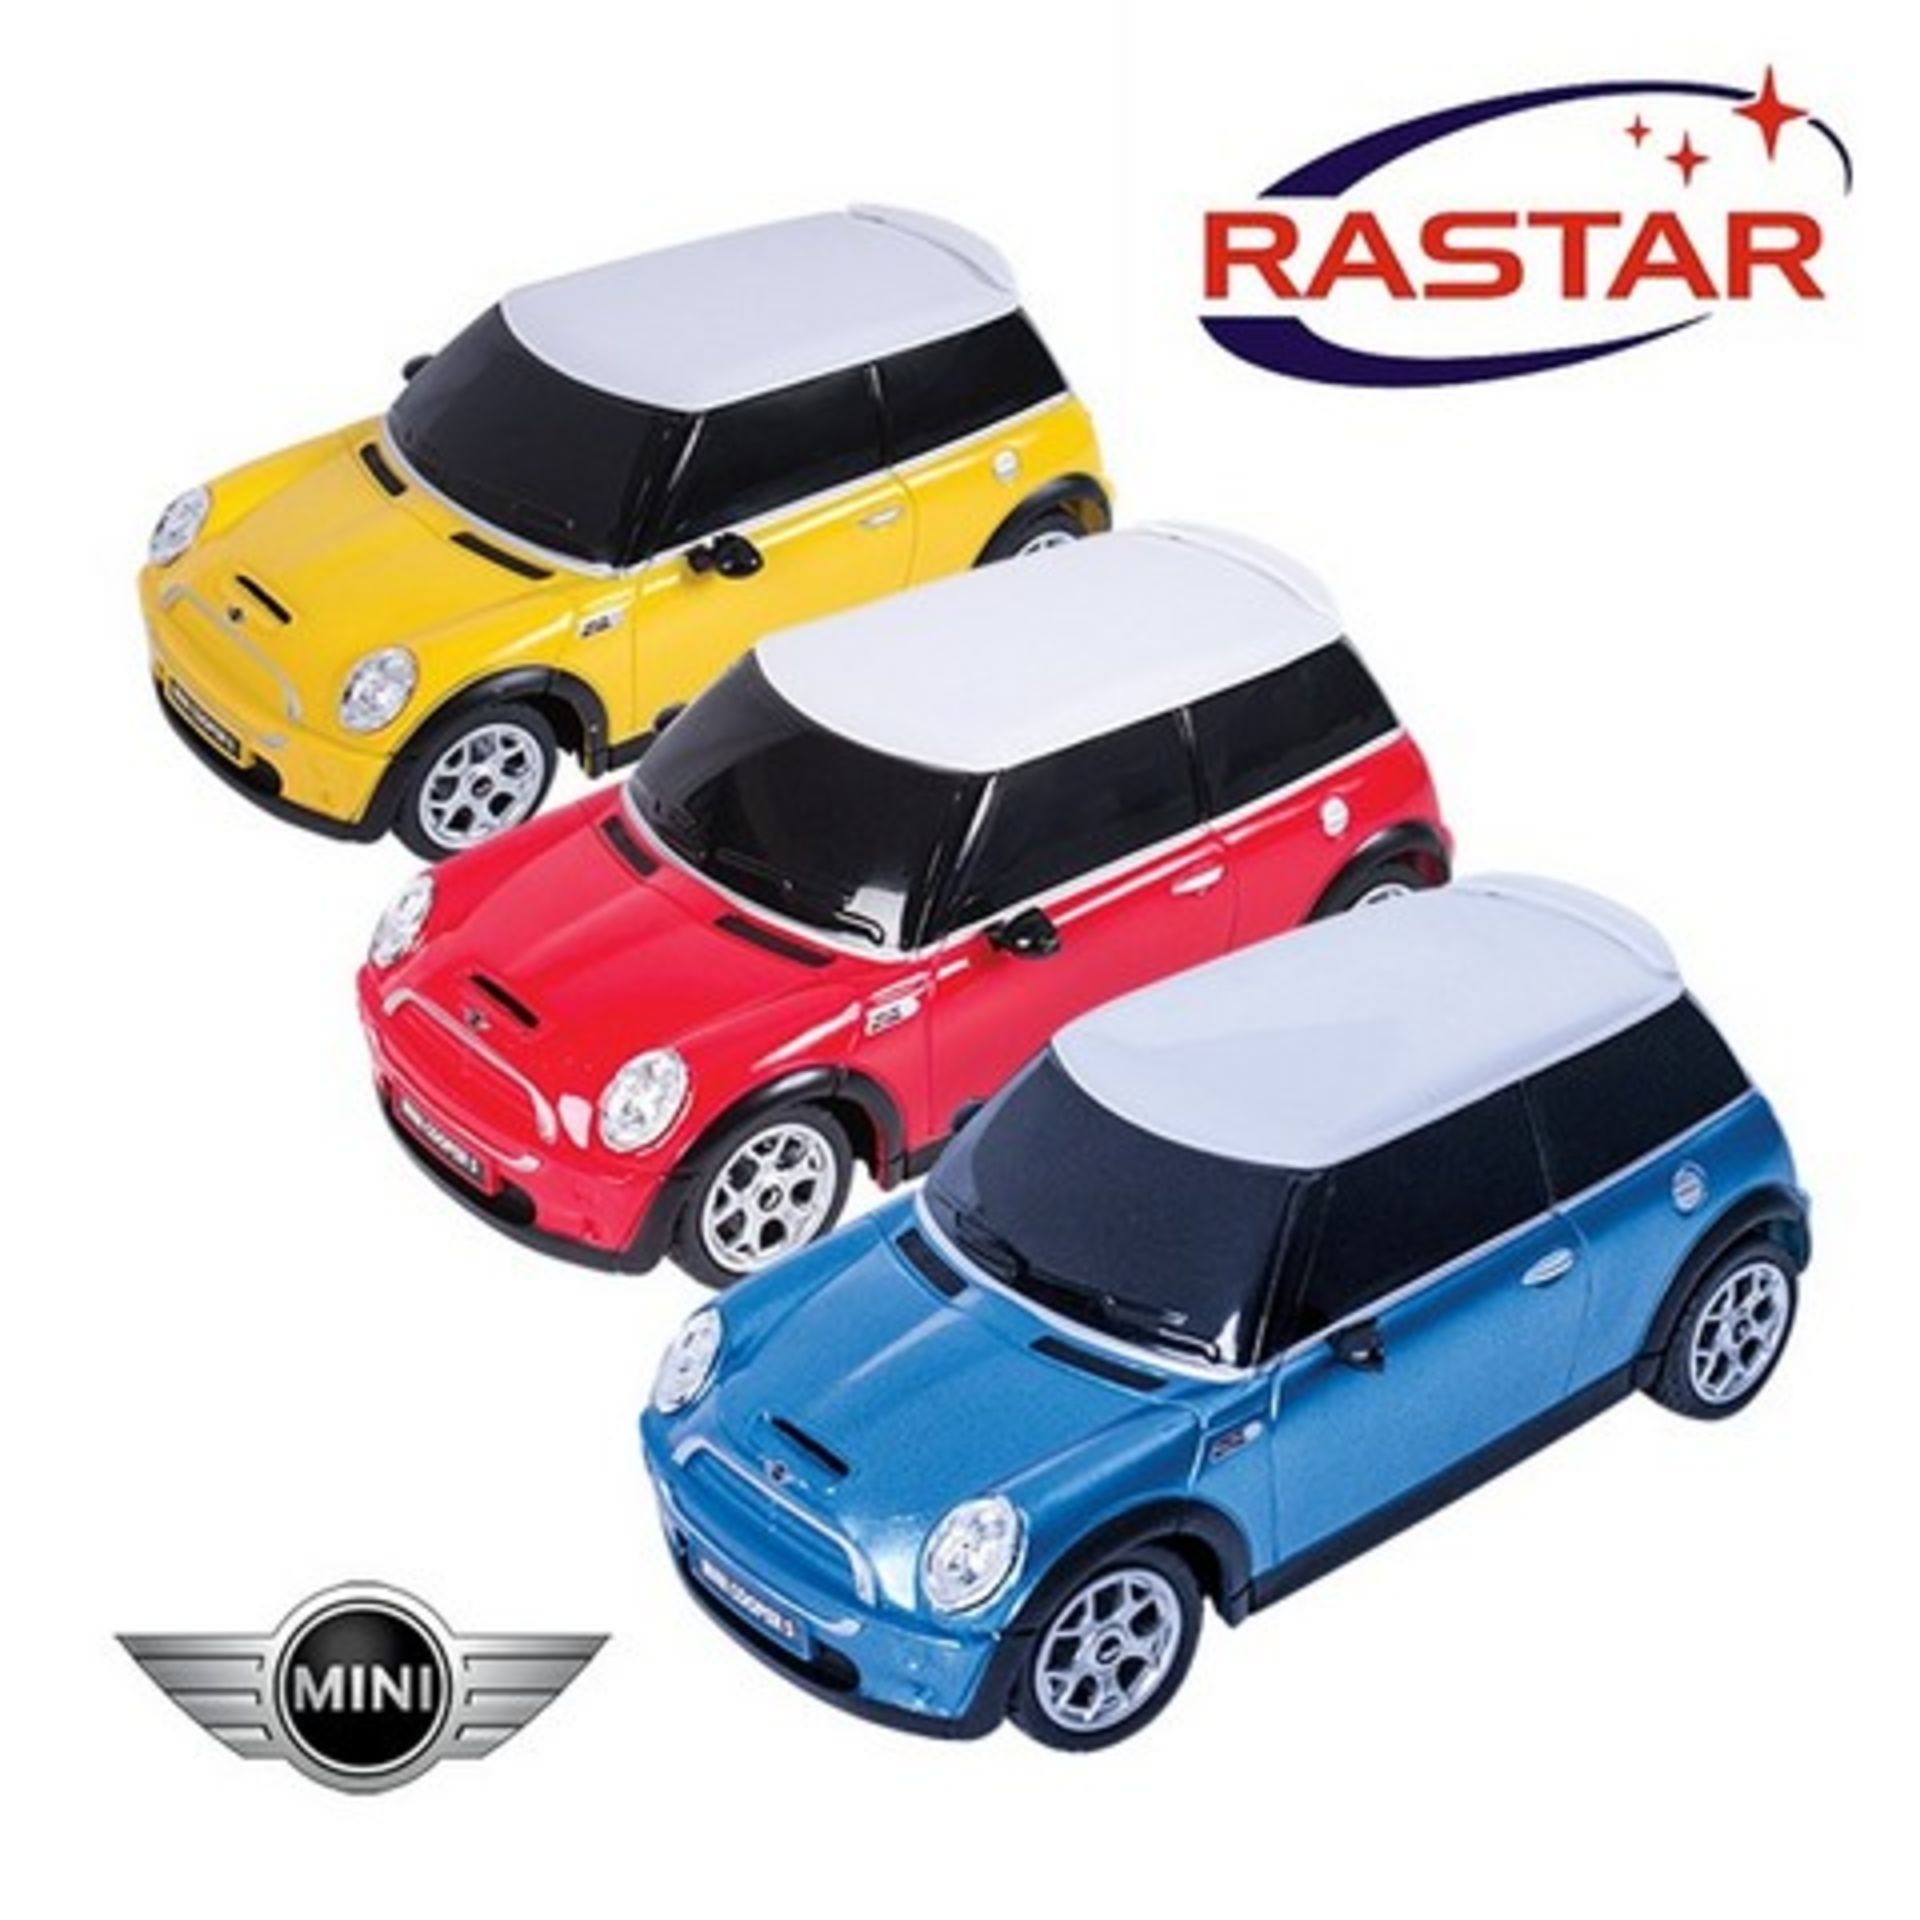 + VAT Brand New 1:24 Scale R/C Mini Cooper S - Colours May Vary